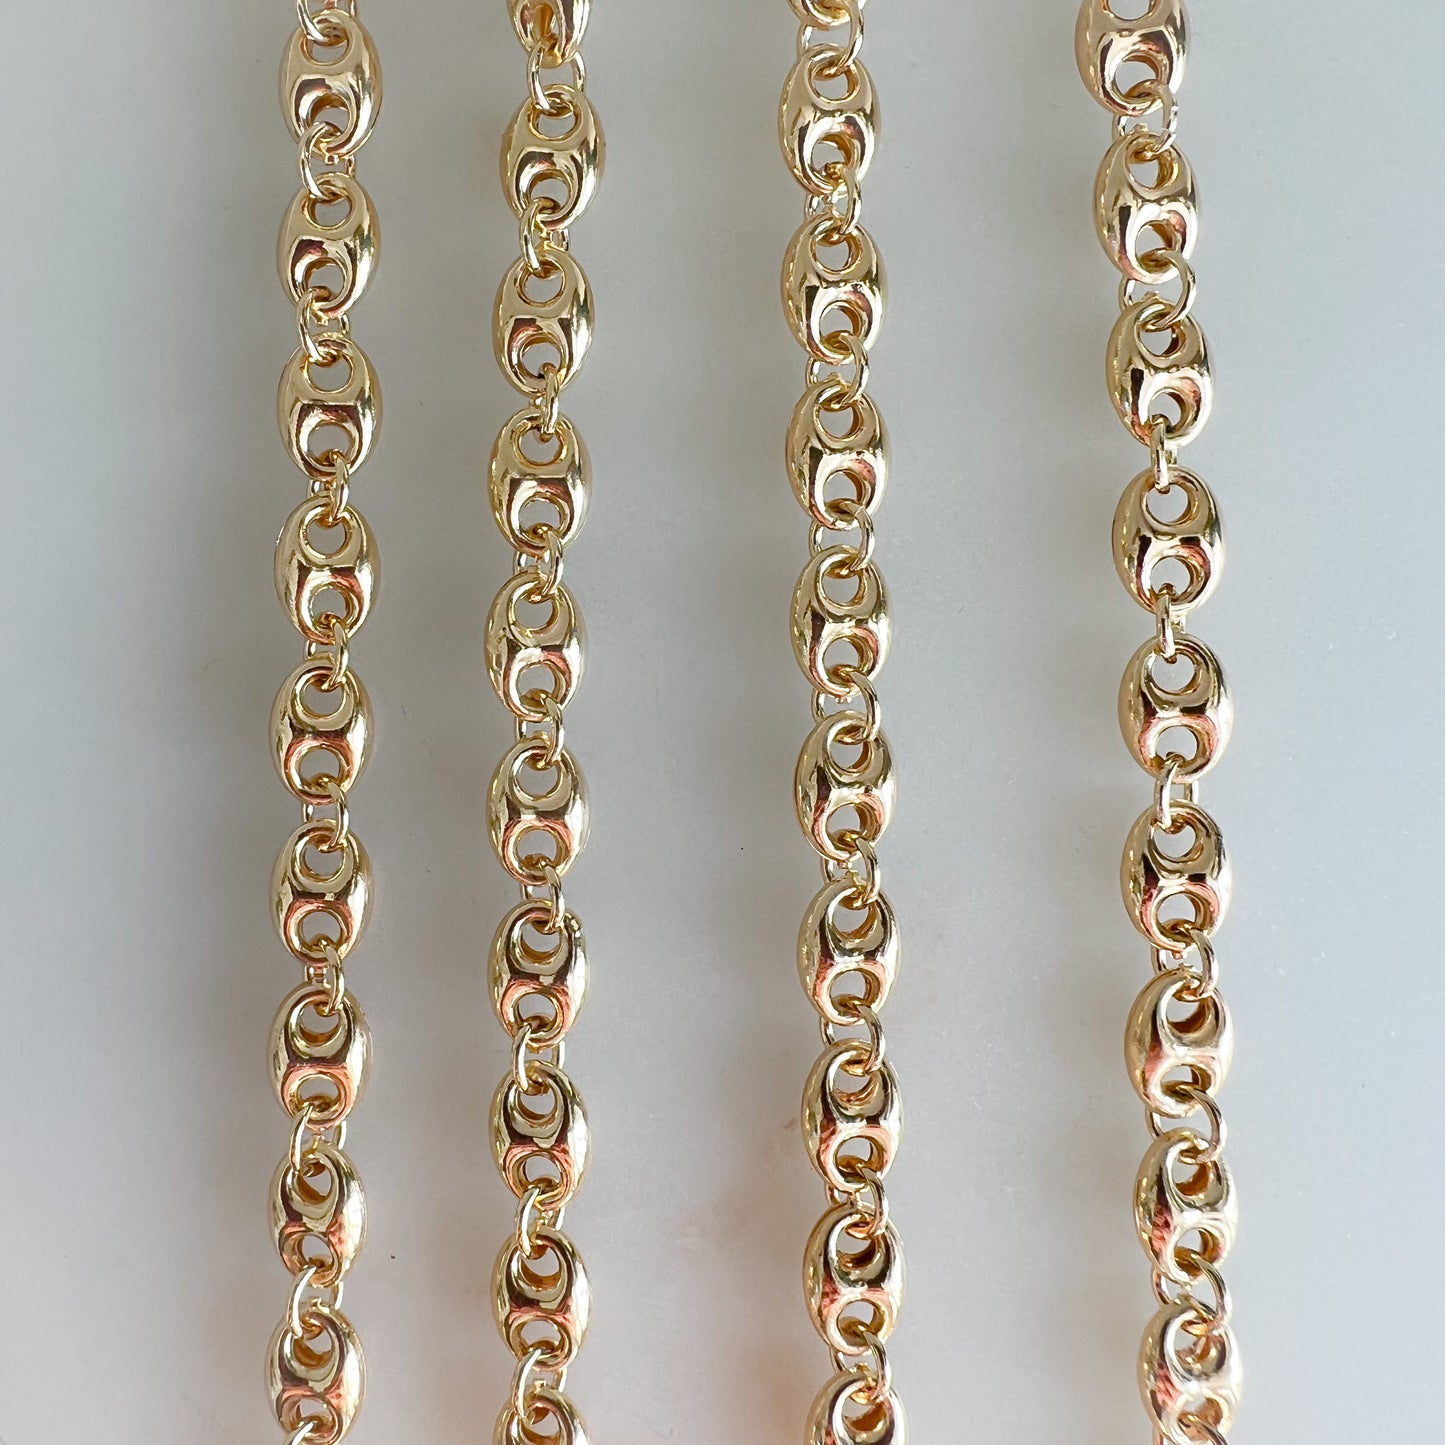 Soda Tab Medium 6mm Gold Filled Chain Necklace